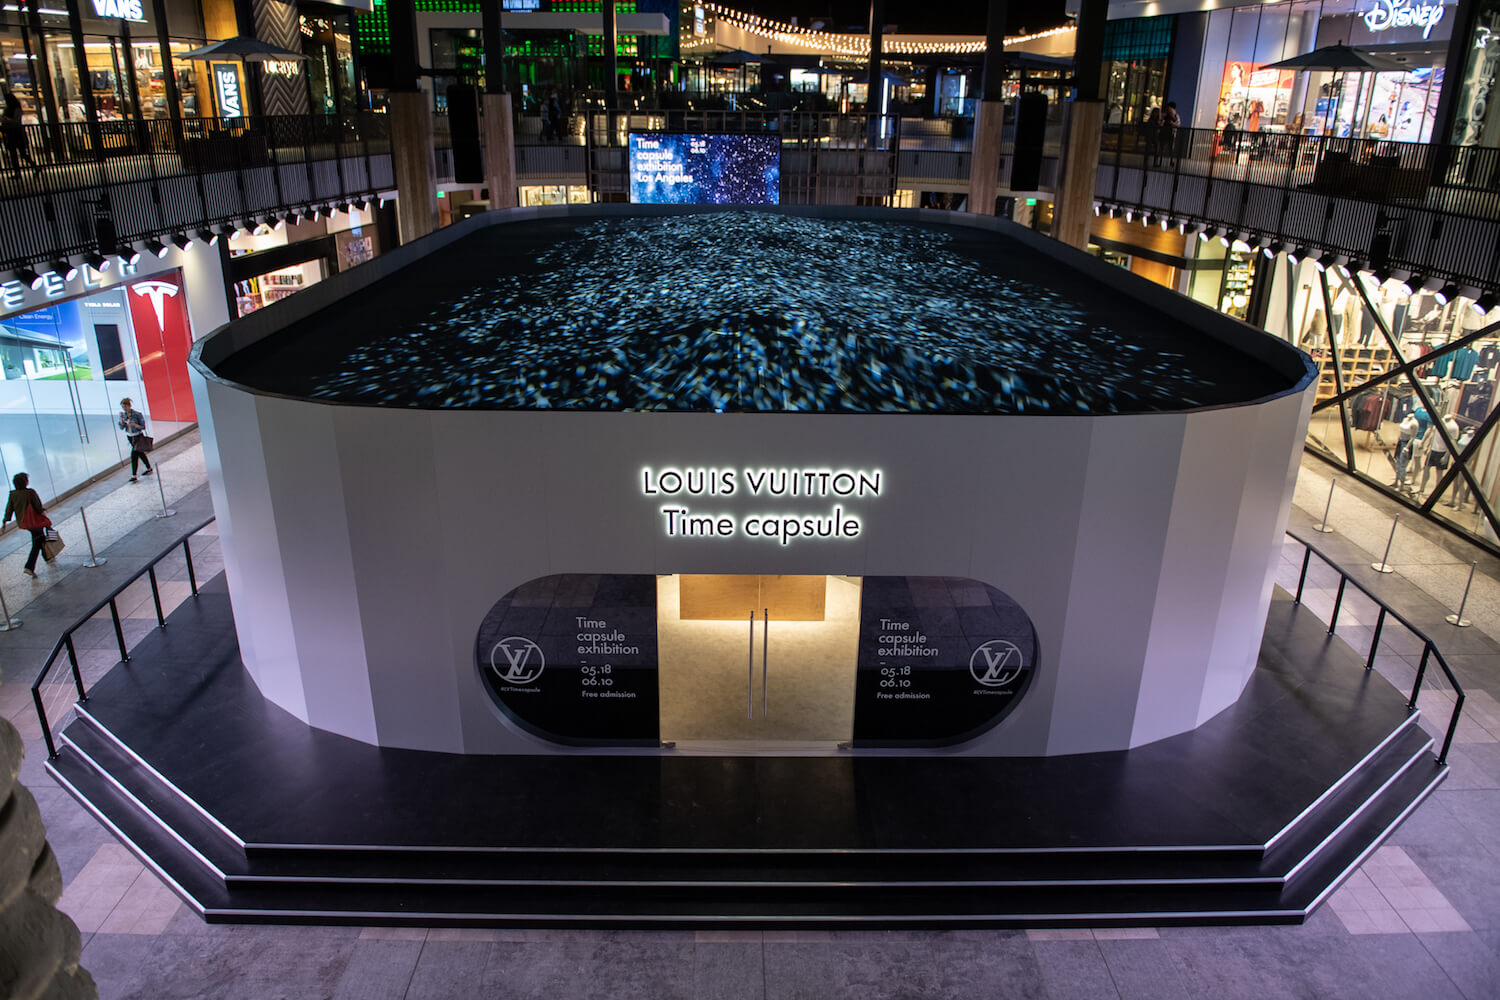 Louis Vuitton Celebrates the Opening of their Time Capsule Exhibition at Westfield Century City ...